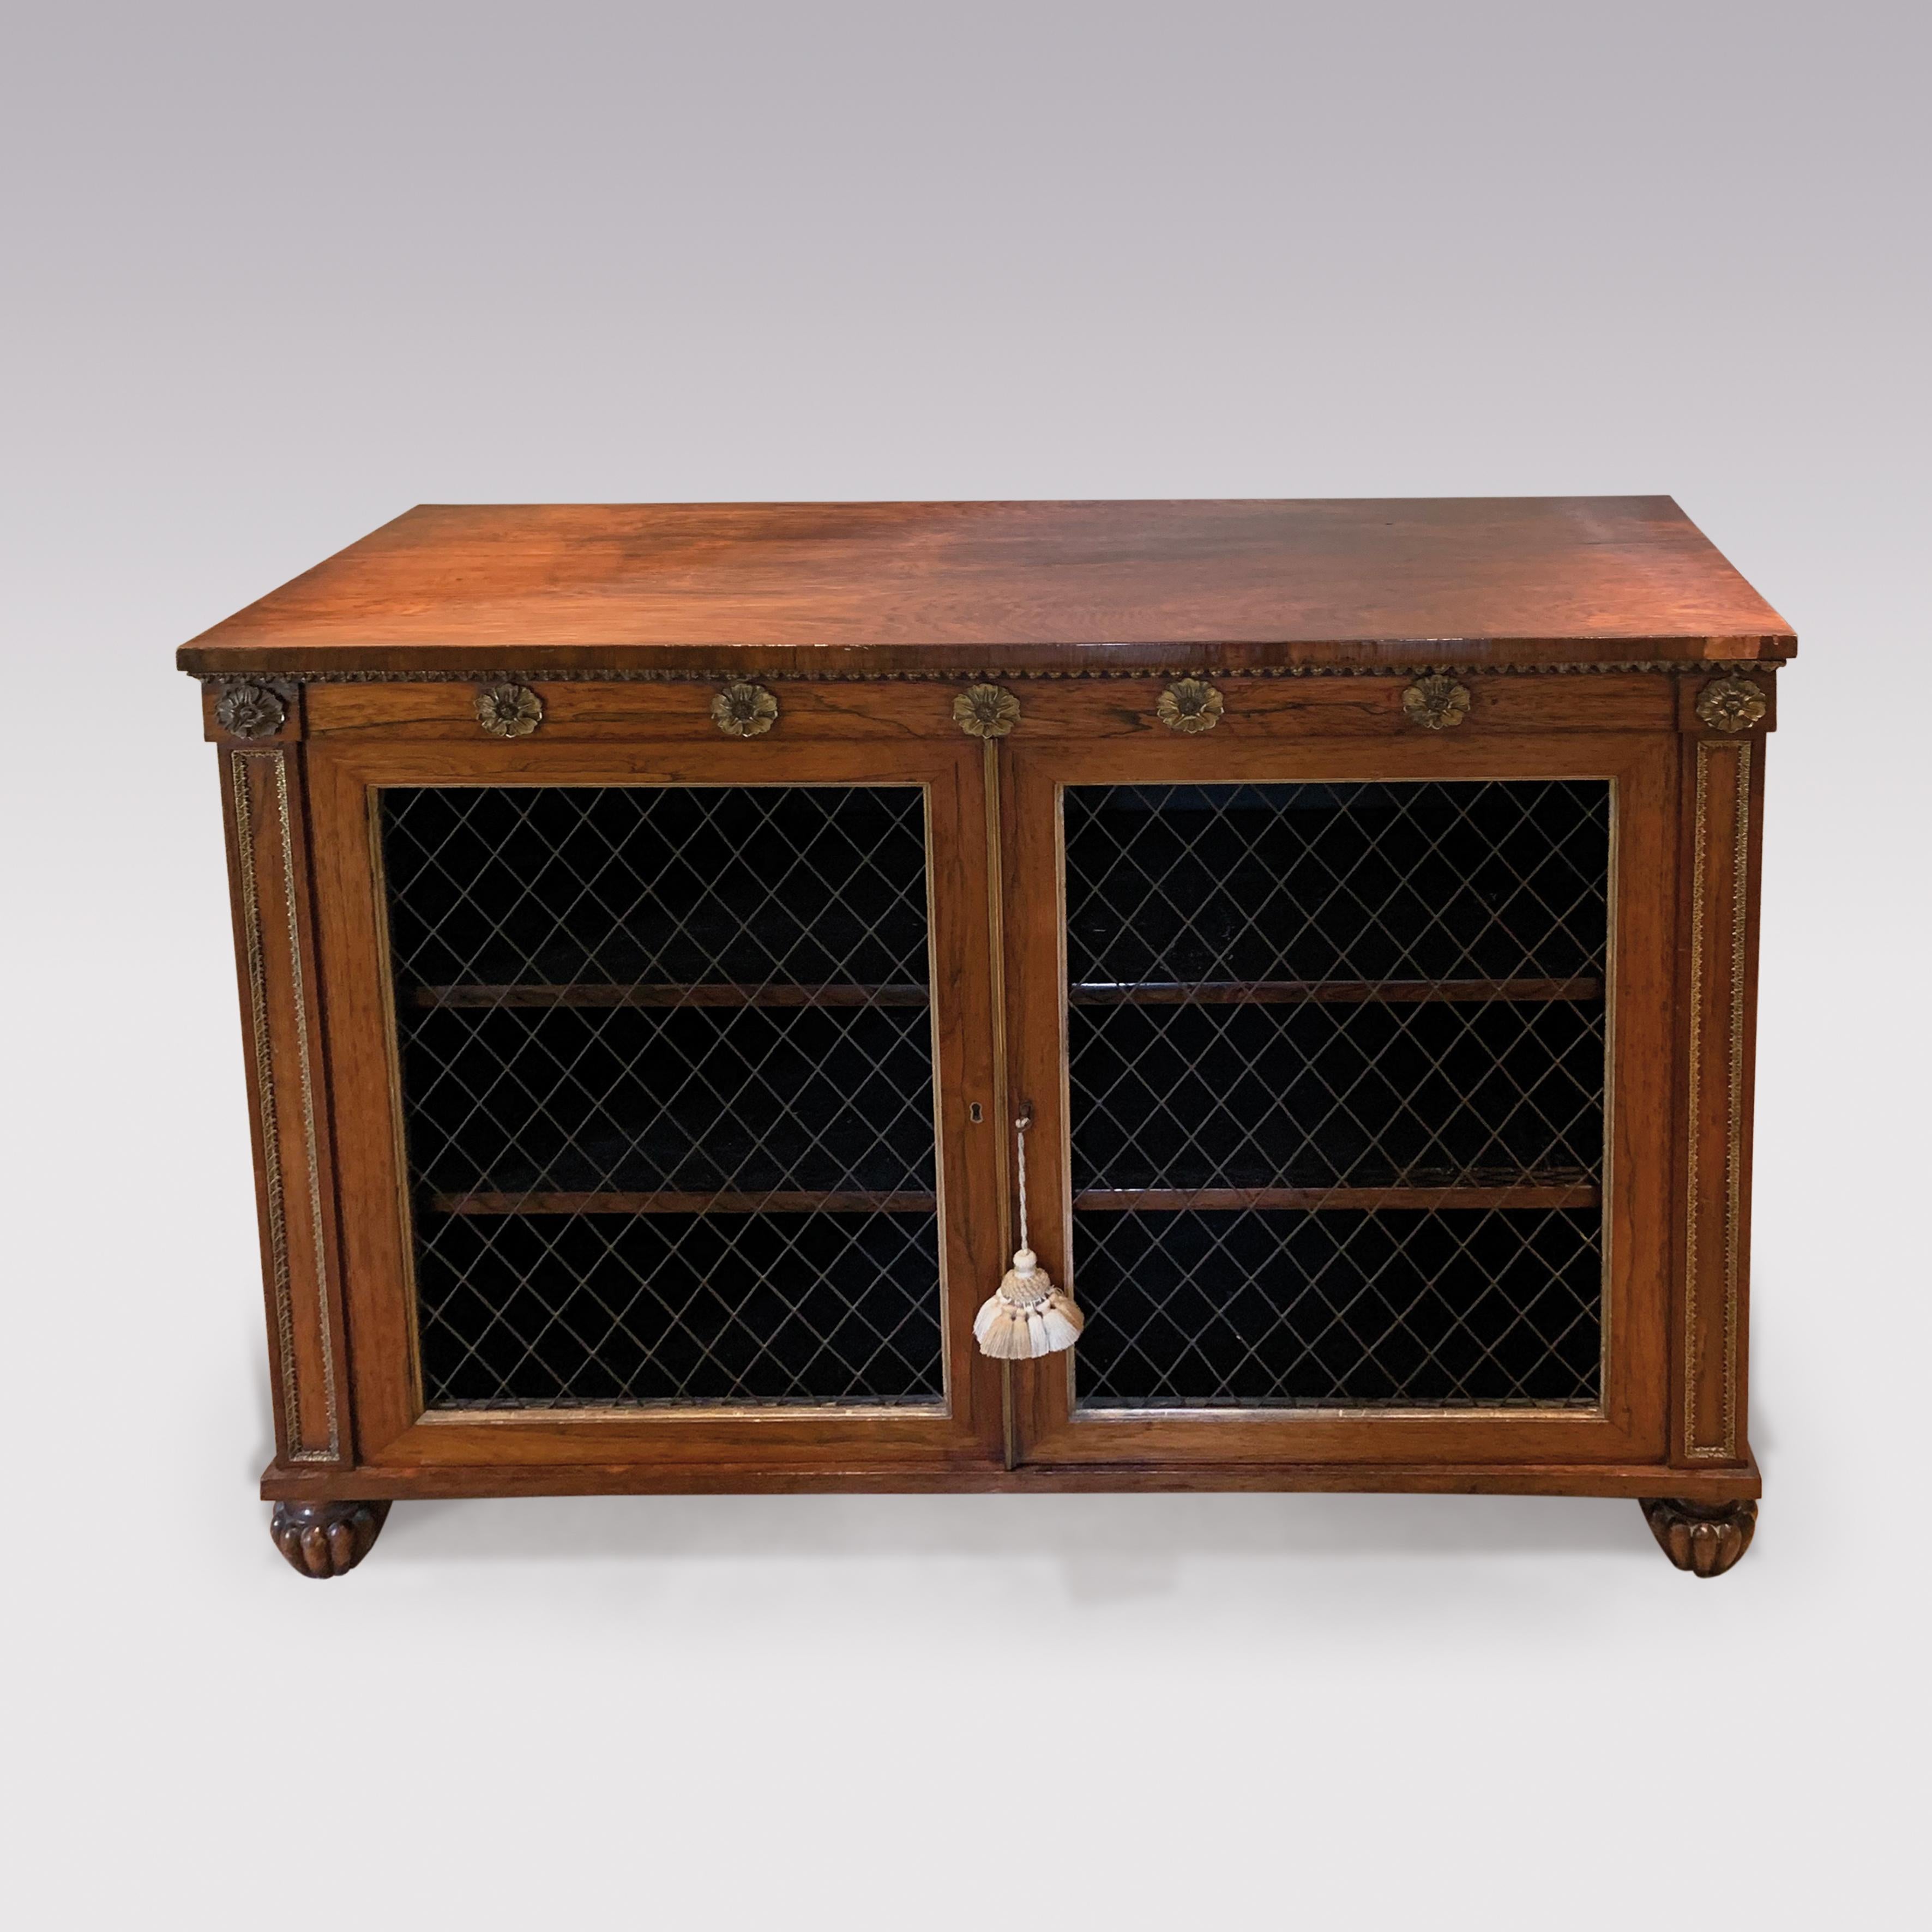 An early 19th century Regency period rosewood Chiffonier, having gilt-brass paterae mounted frieze above wire grill doors flanked by panel columns ending on carved melon feet.